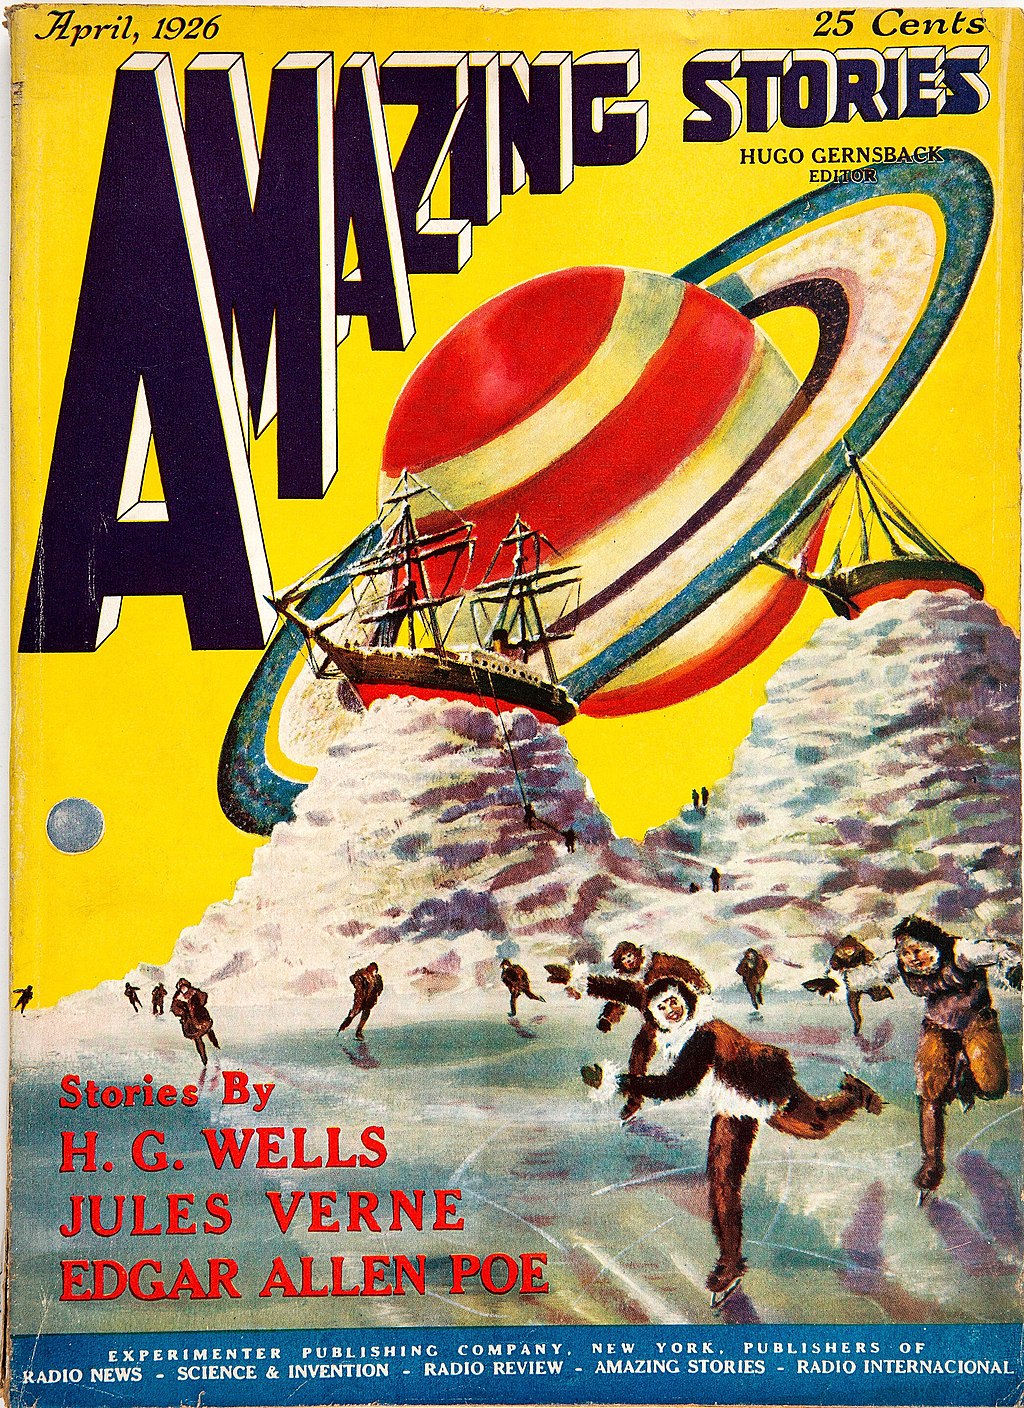 History of US science fiction and fantasy magazines to 1950 pic